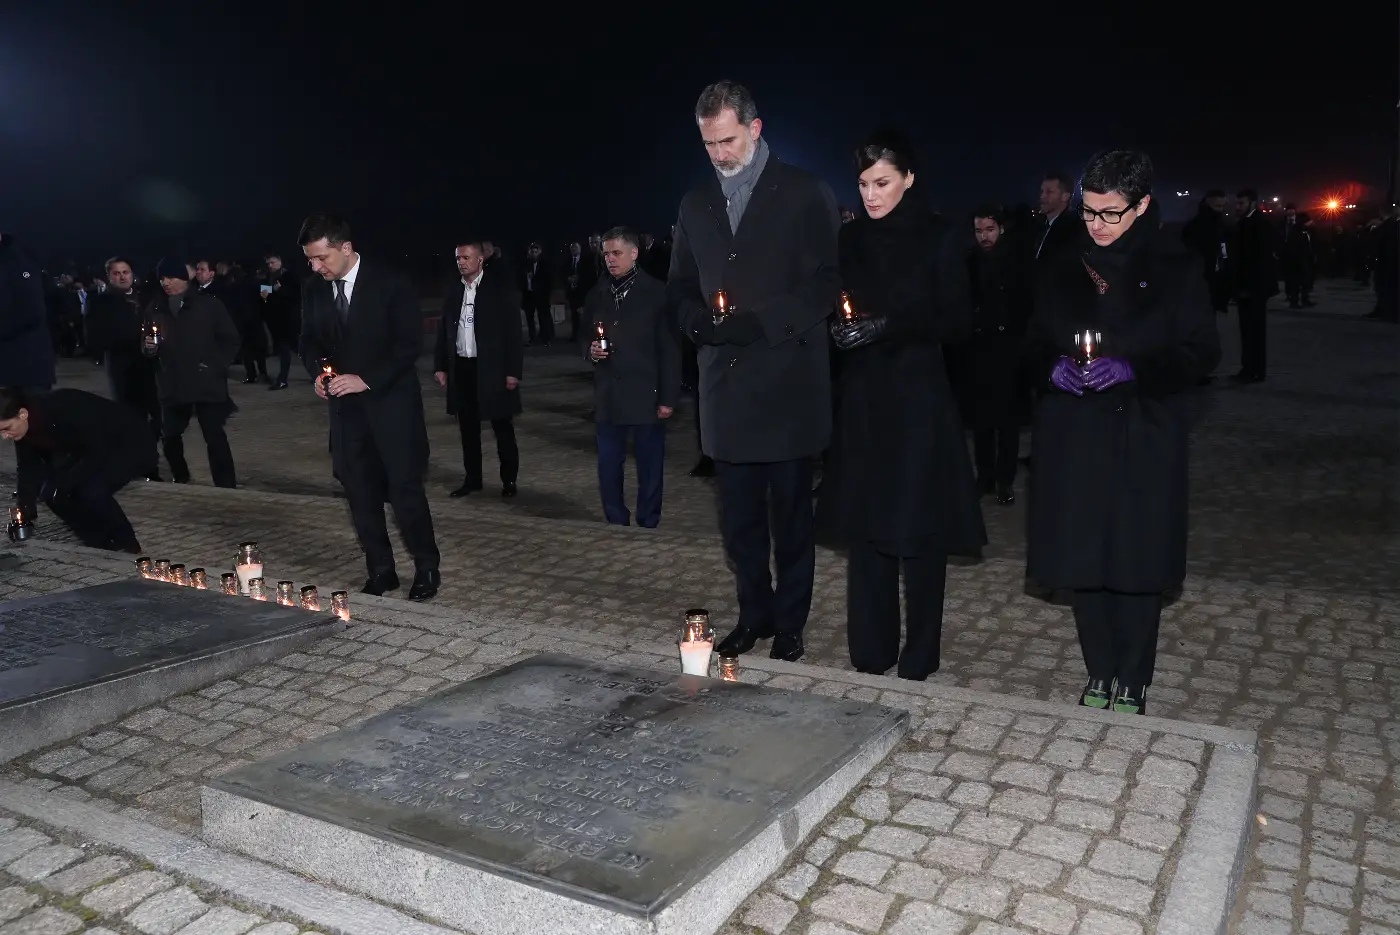 King Felipe and Queen Letizia attended the commemoration of 75th anniversary of liberation of Auschwitz-Birkenau